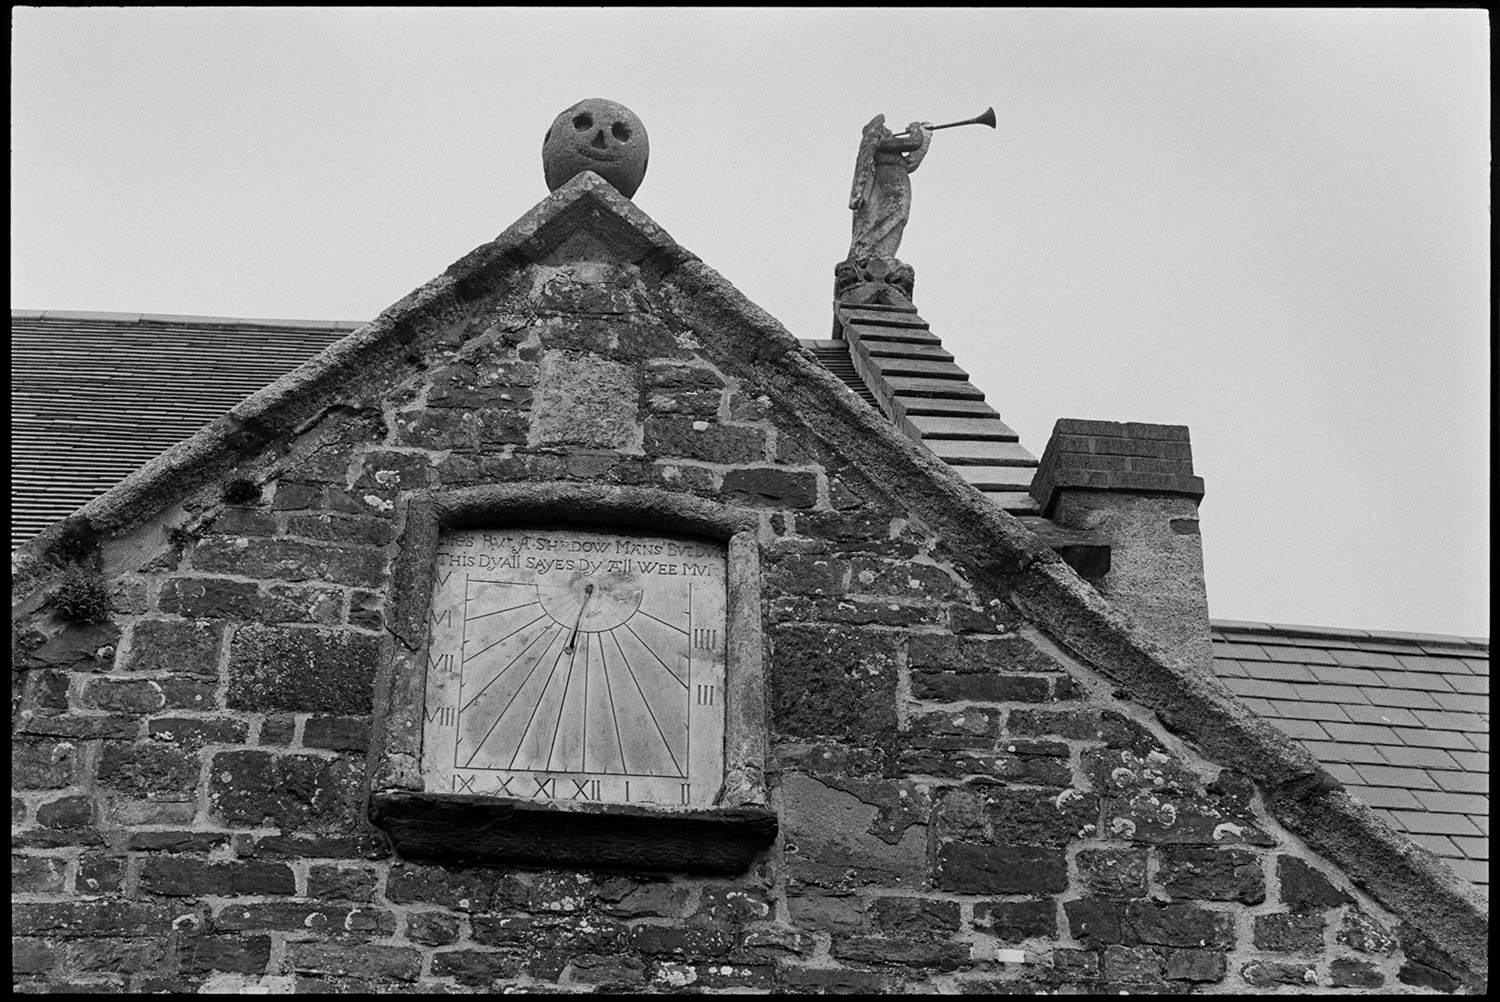 Sundial on front of Victorian railway station.
[A Victorian stone sundial on the front of Kings Nympton railway station. A carved stone face and a stone carving of an angel with a trumpet are also visible on the roof.]